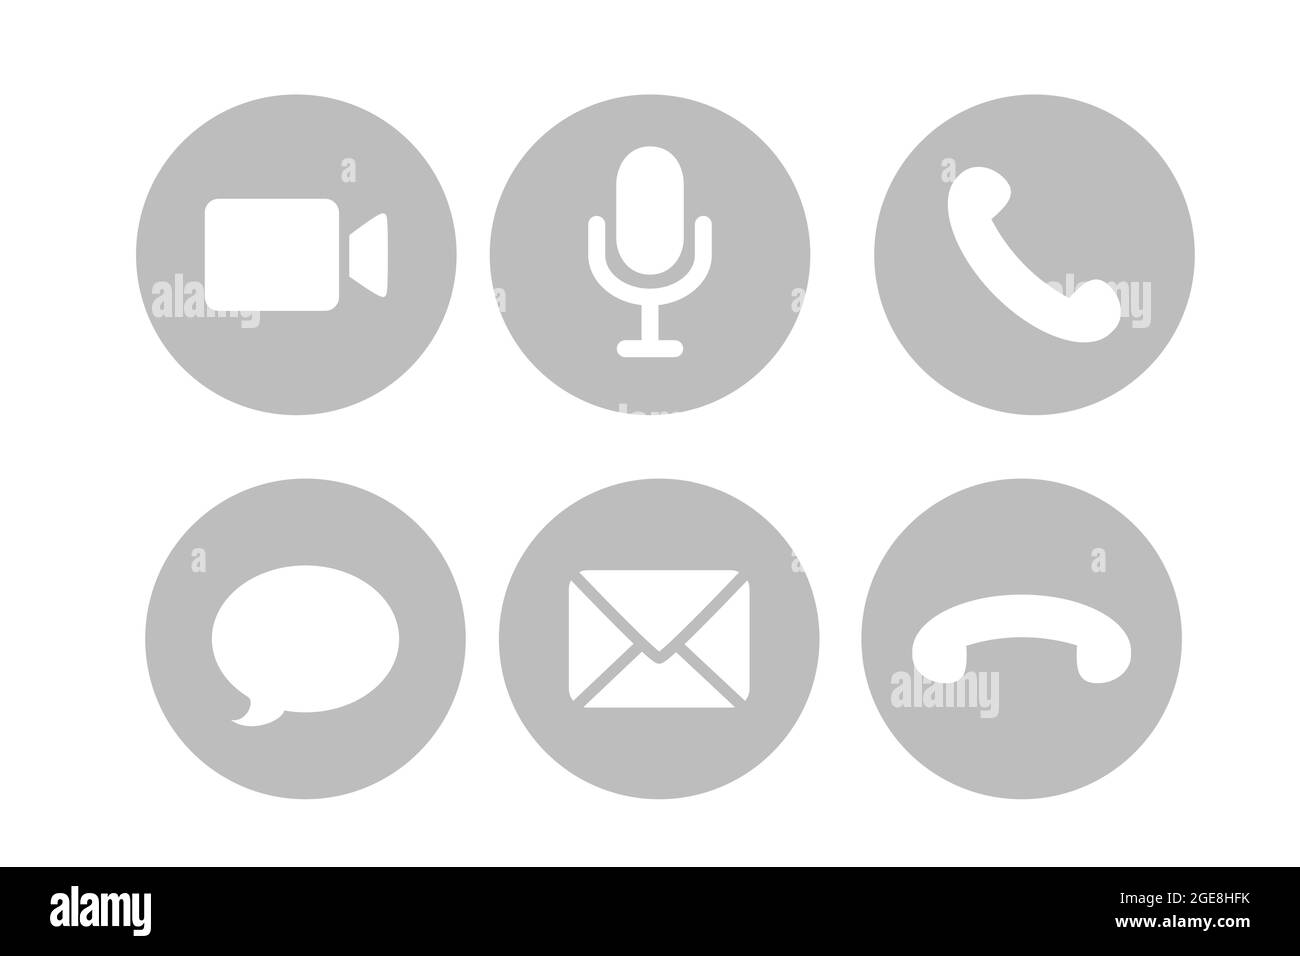 Virtual hangouts icons for conference call. Video, sound, message, mail and call icons isolated on white background. Flat vector illustration Stock Vector